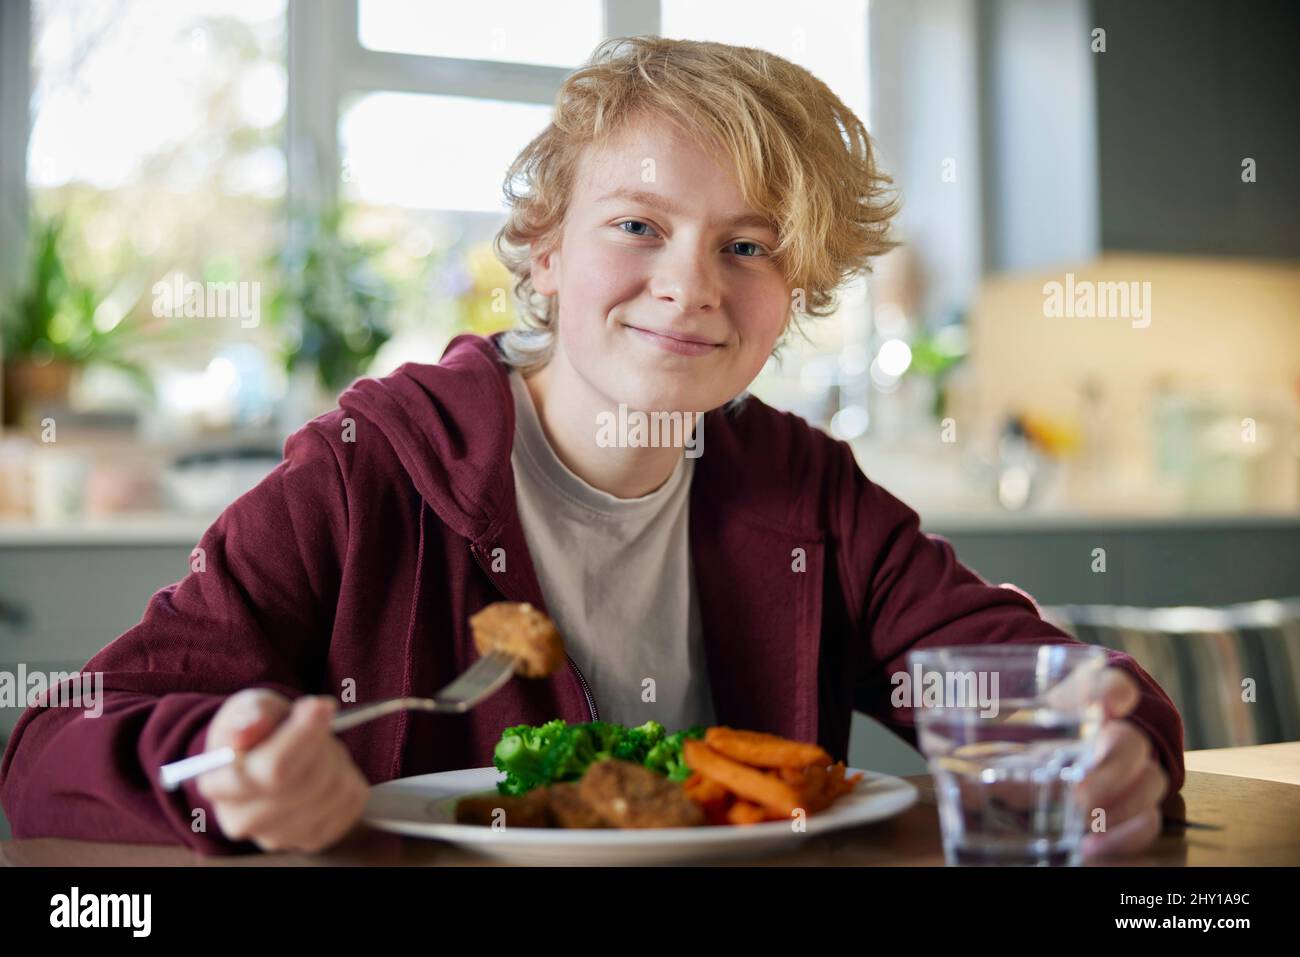 Portrait Of Teeange Girl Eating Vegan Meal Sitting At Table In Kitchen At Home Stockfoto